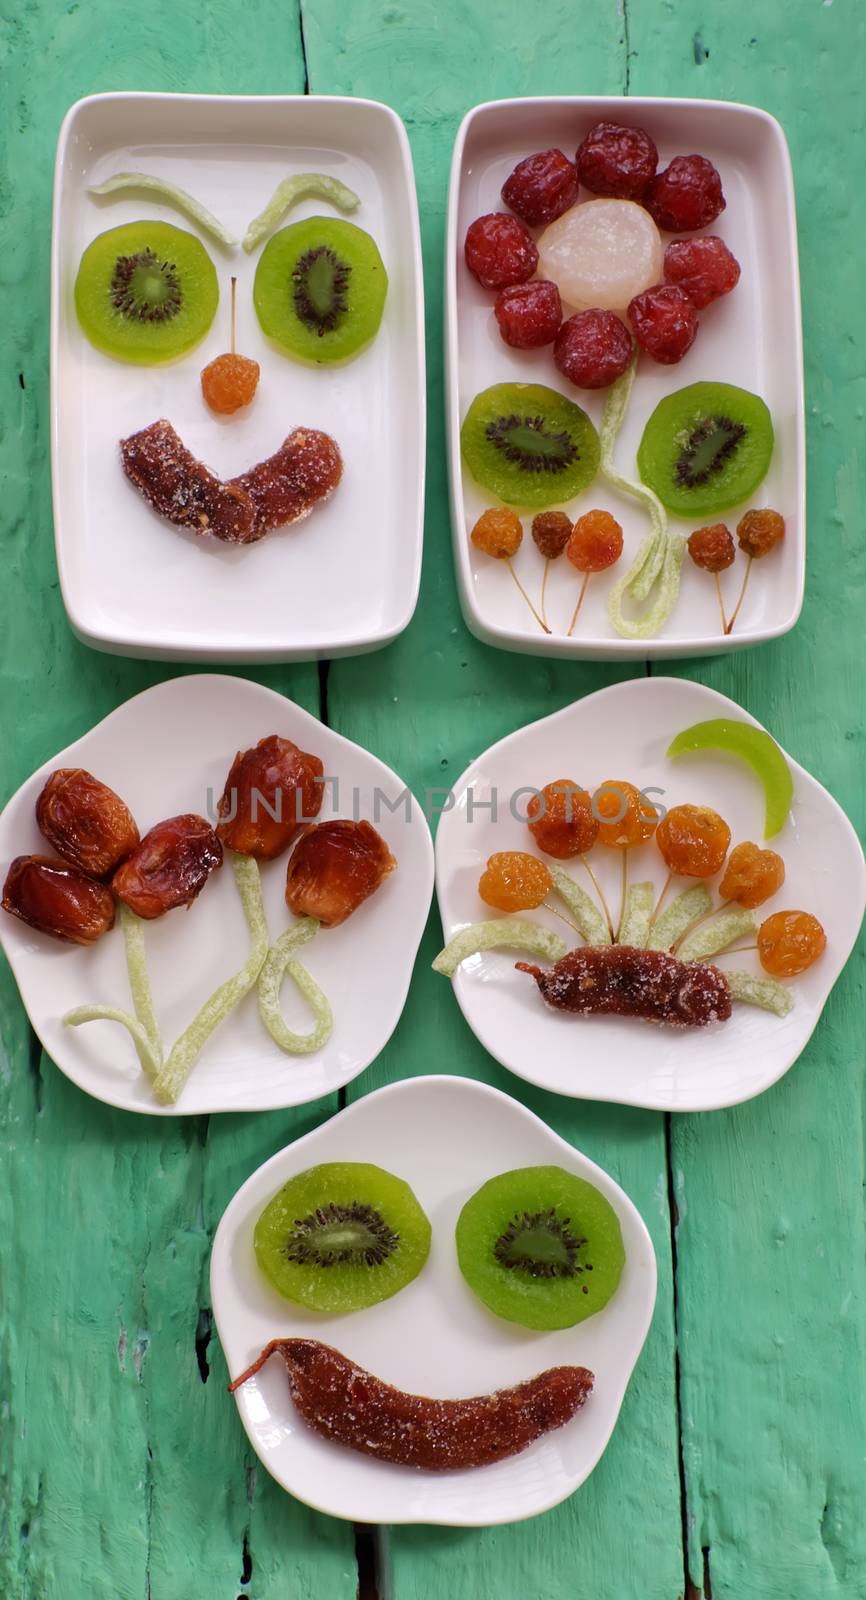 Vietnamese food for Tet, preserved fruit jam by xuanhuongho